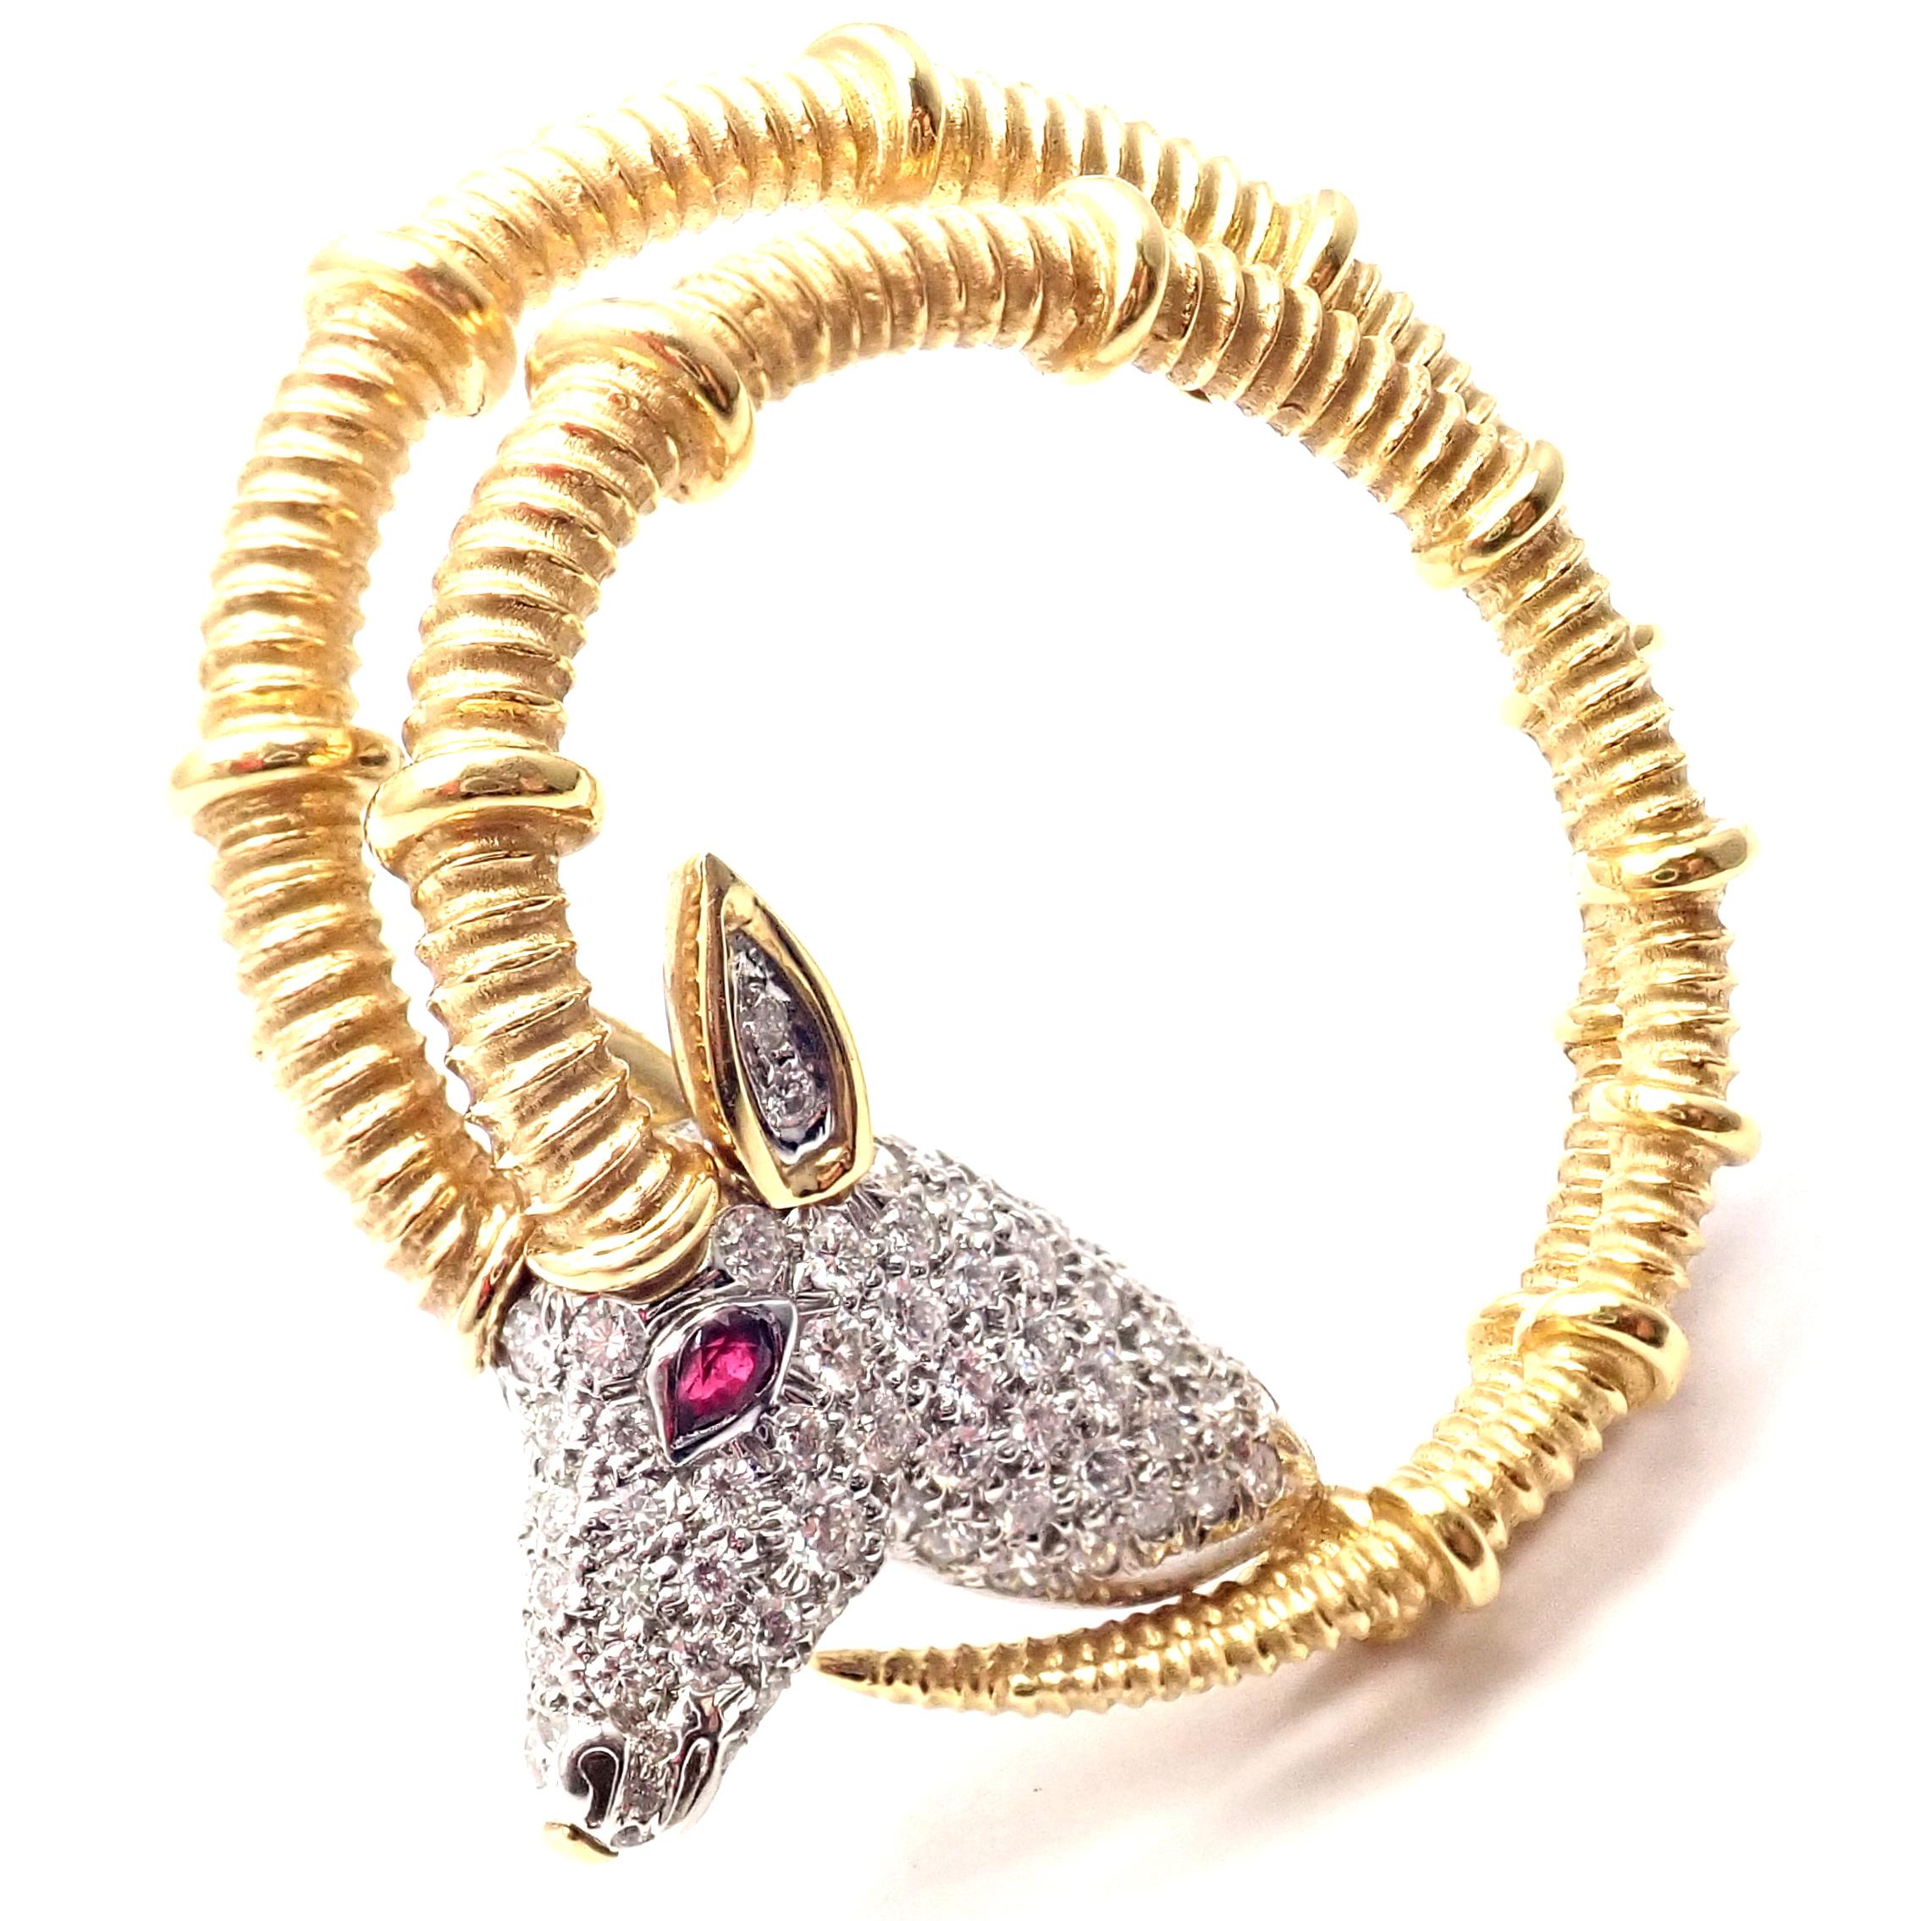 18k Yellow Gold and Platinum Diamond Ruby Ibex Pin Brooch by Jean Schlumberger for Tiffany & Co. 
With Round brilliant cut diamonds VVS1 clarity, E color 
total weight approx. 1.20ct  
1 ruby
Details:  
Weight: 24.1 grams 
Measurements: 1.63